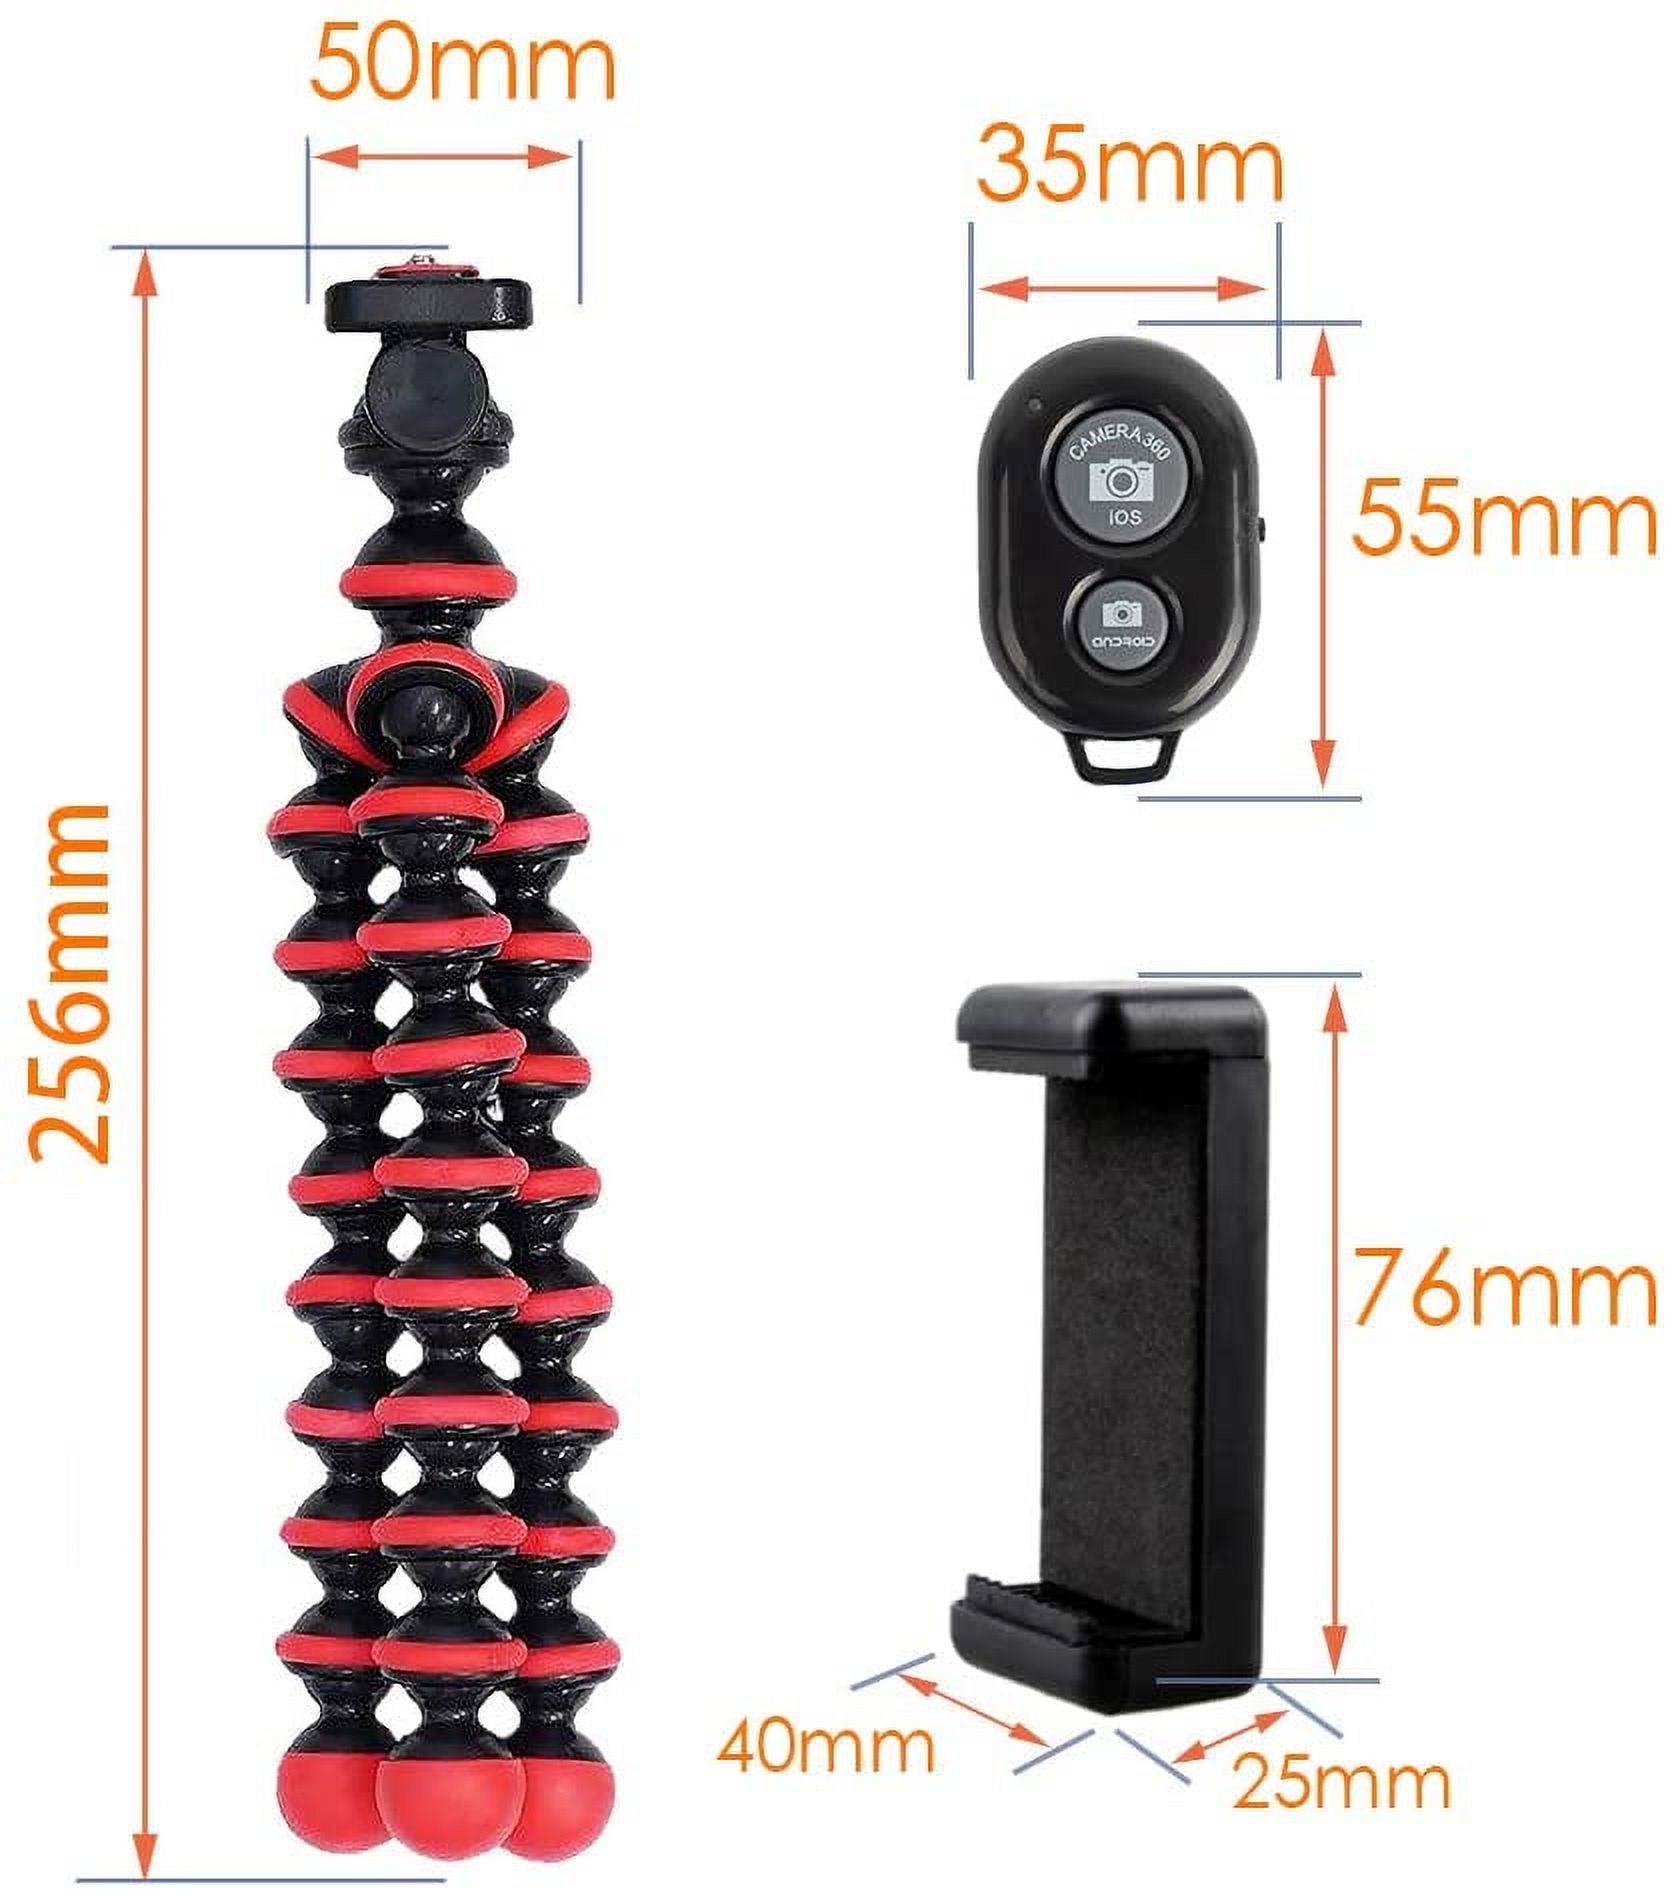 Phone Tripod, Portable Cell Phone Tripod Camera Tripod Stand with Wireless Remote Flexible Tripod Stand Compatible for iPhone 11 Pro Xs MAX XR X SE 8 7 6S Plus Samsung Android Phones Gopro Camera - image 3 of 7